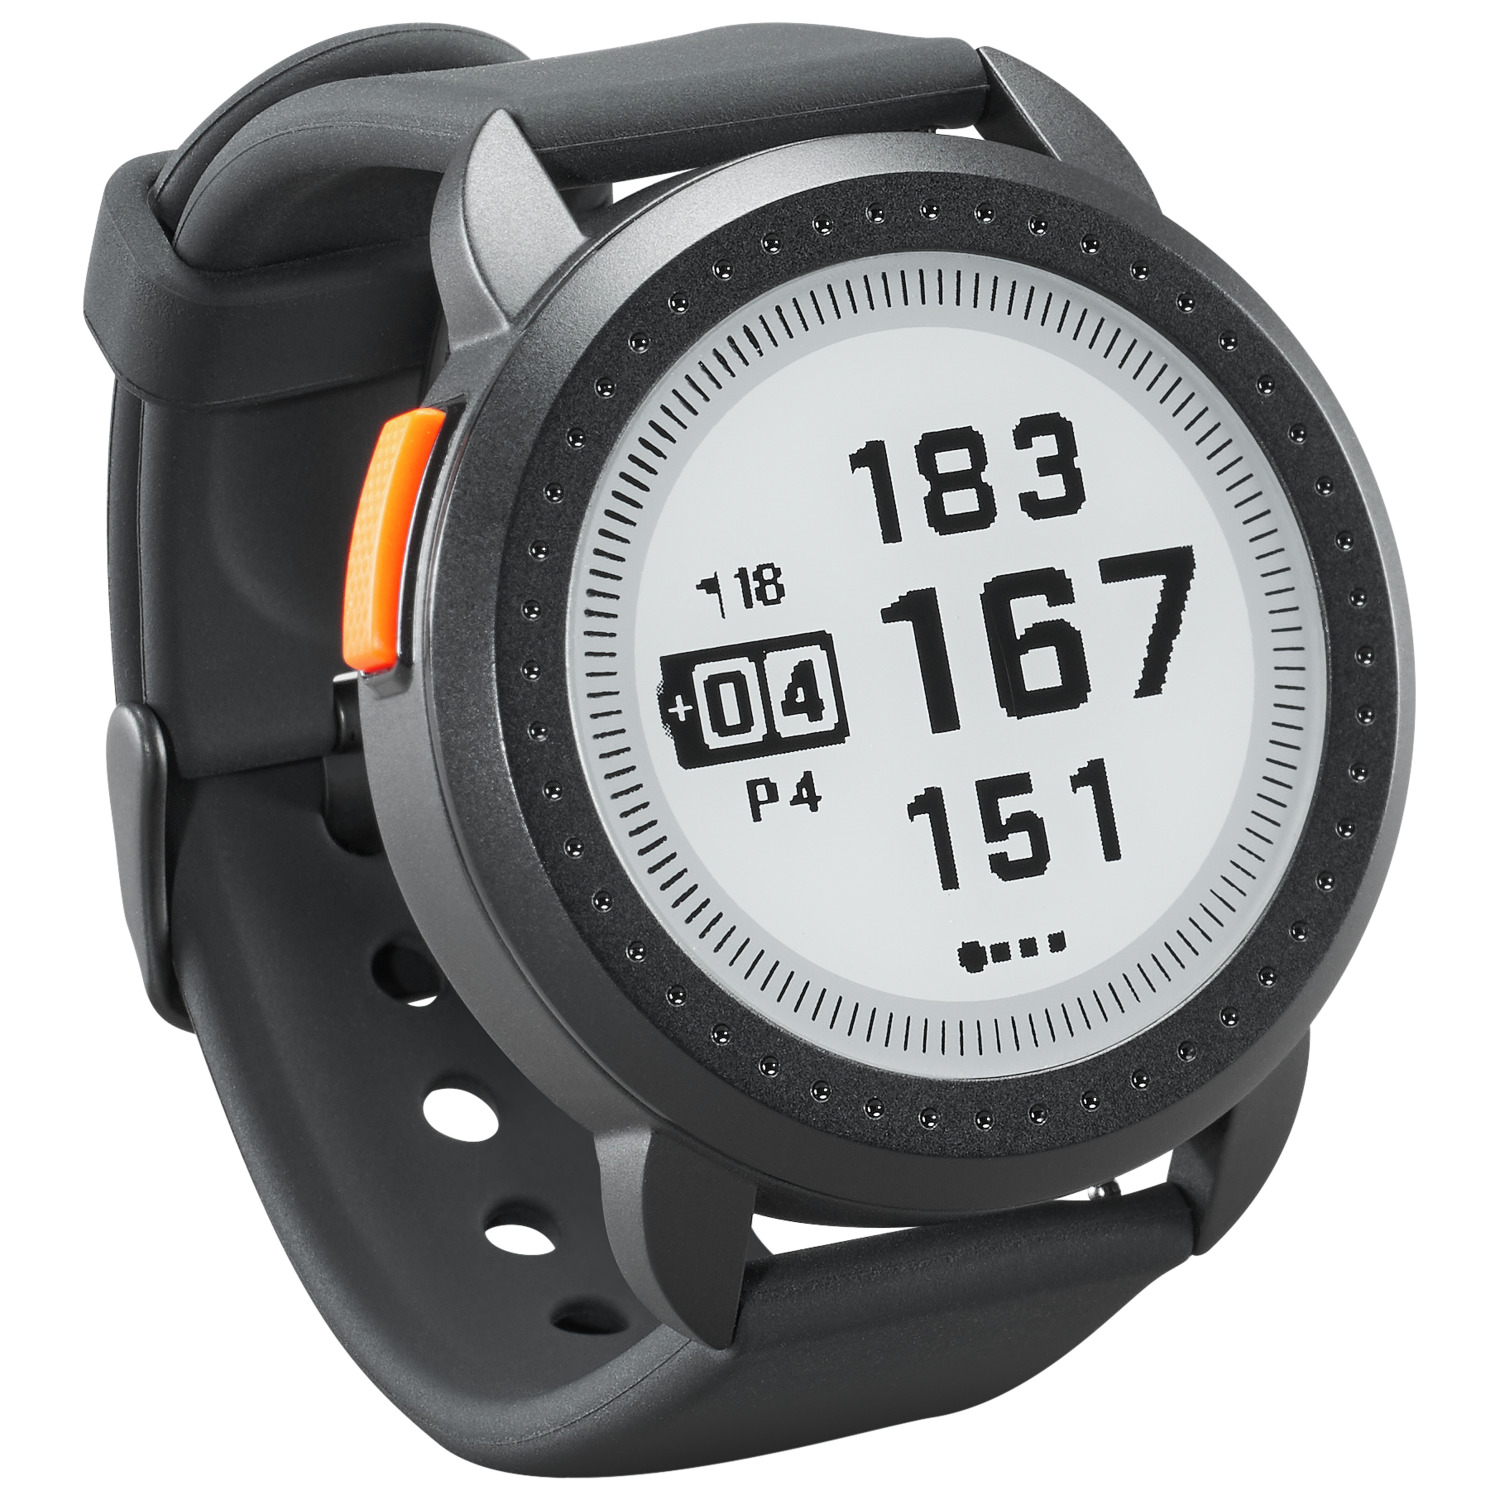 Bushnell GPS Ion Edge Golf Watch 36,000+ Courses loaded, Bluetooth, 15hr Battery